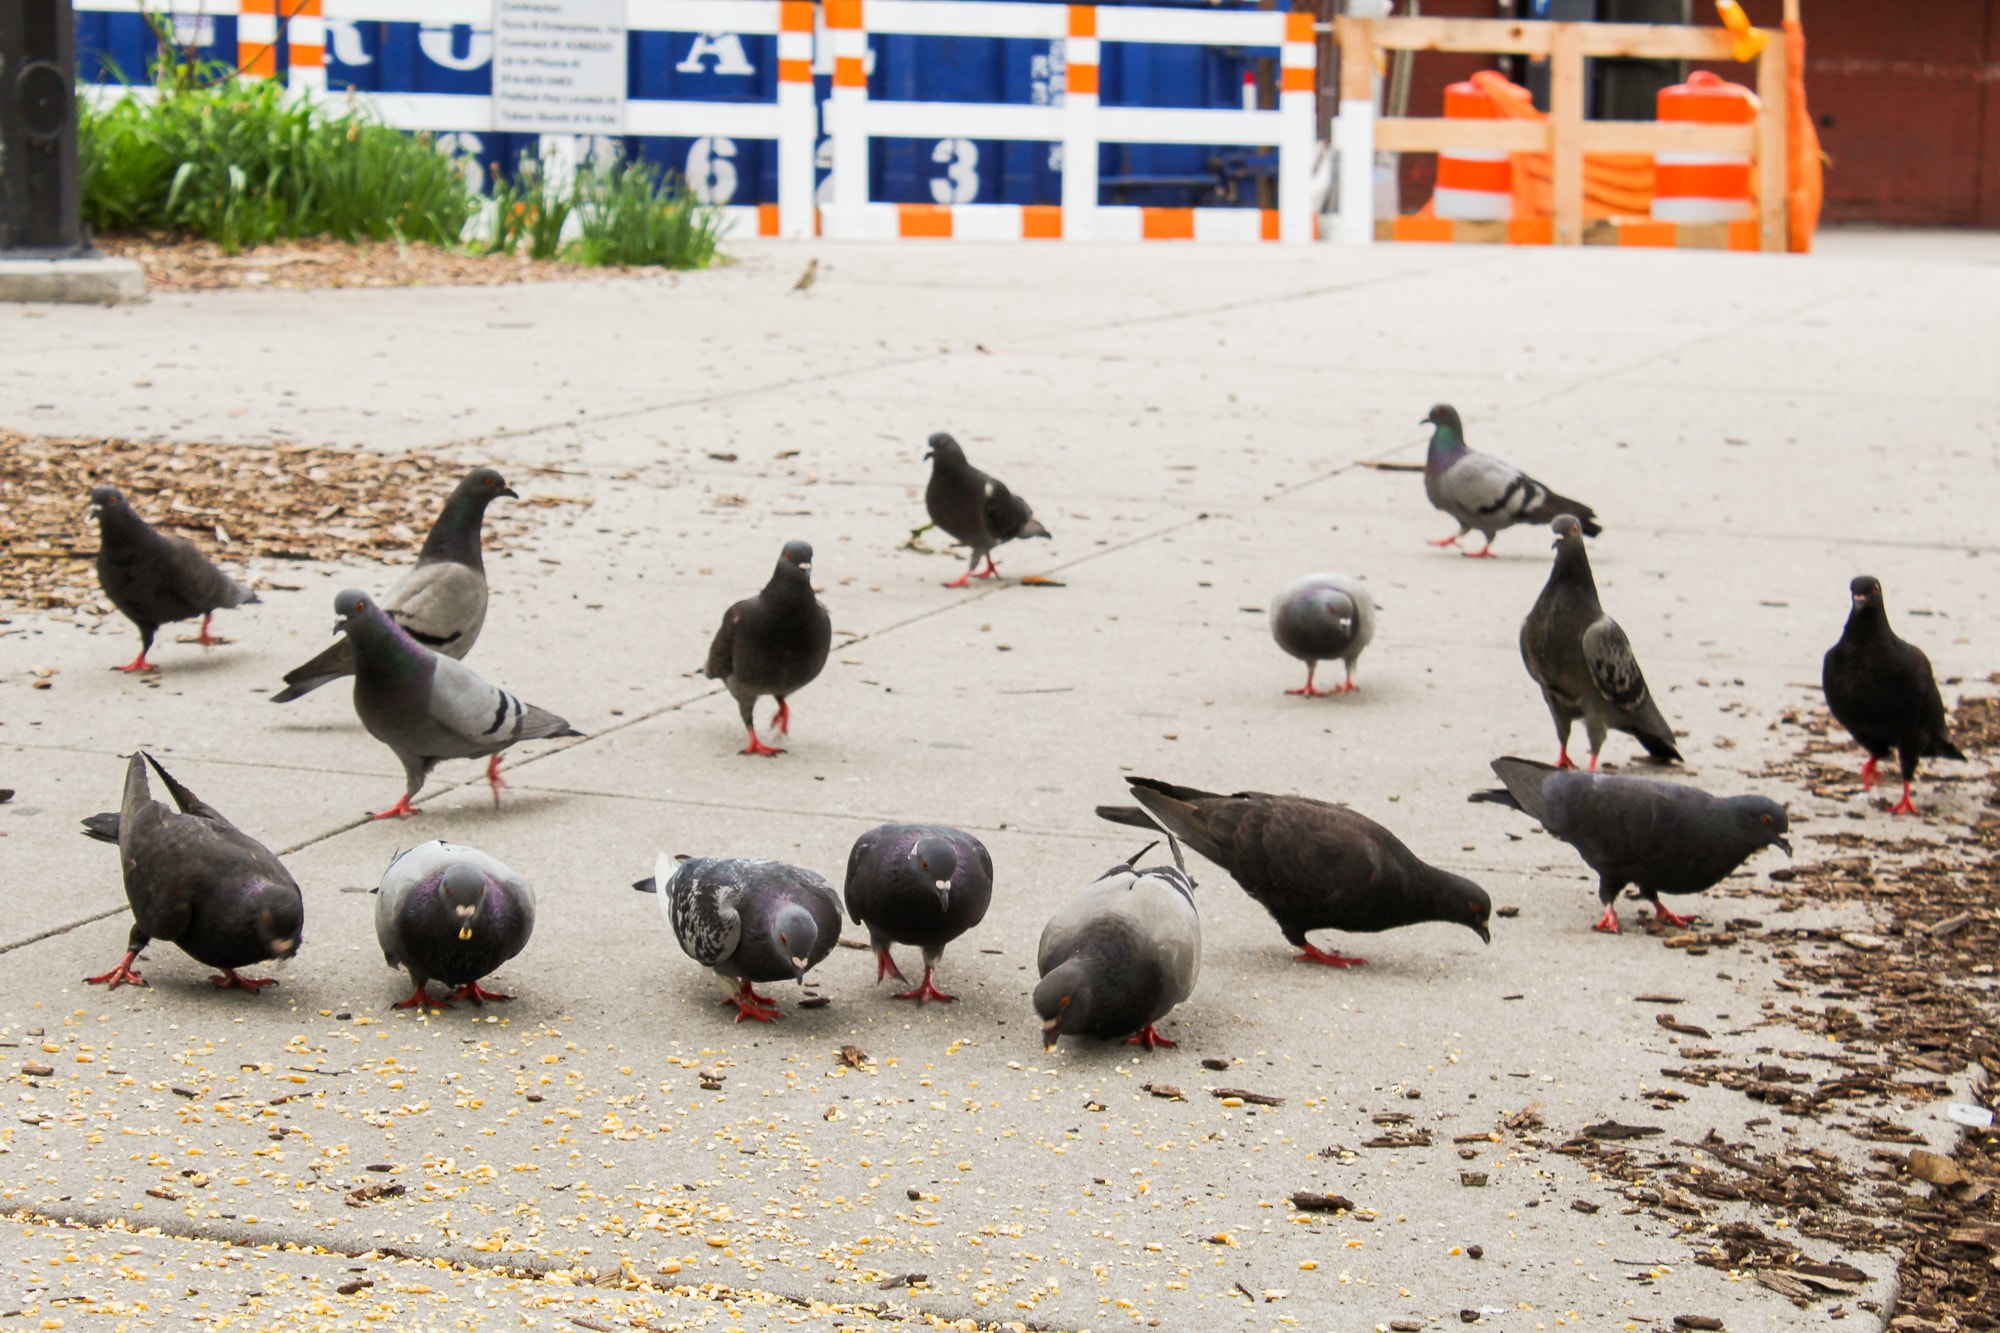 Pigeons. Photo by Christie Taylor for Science Friday